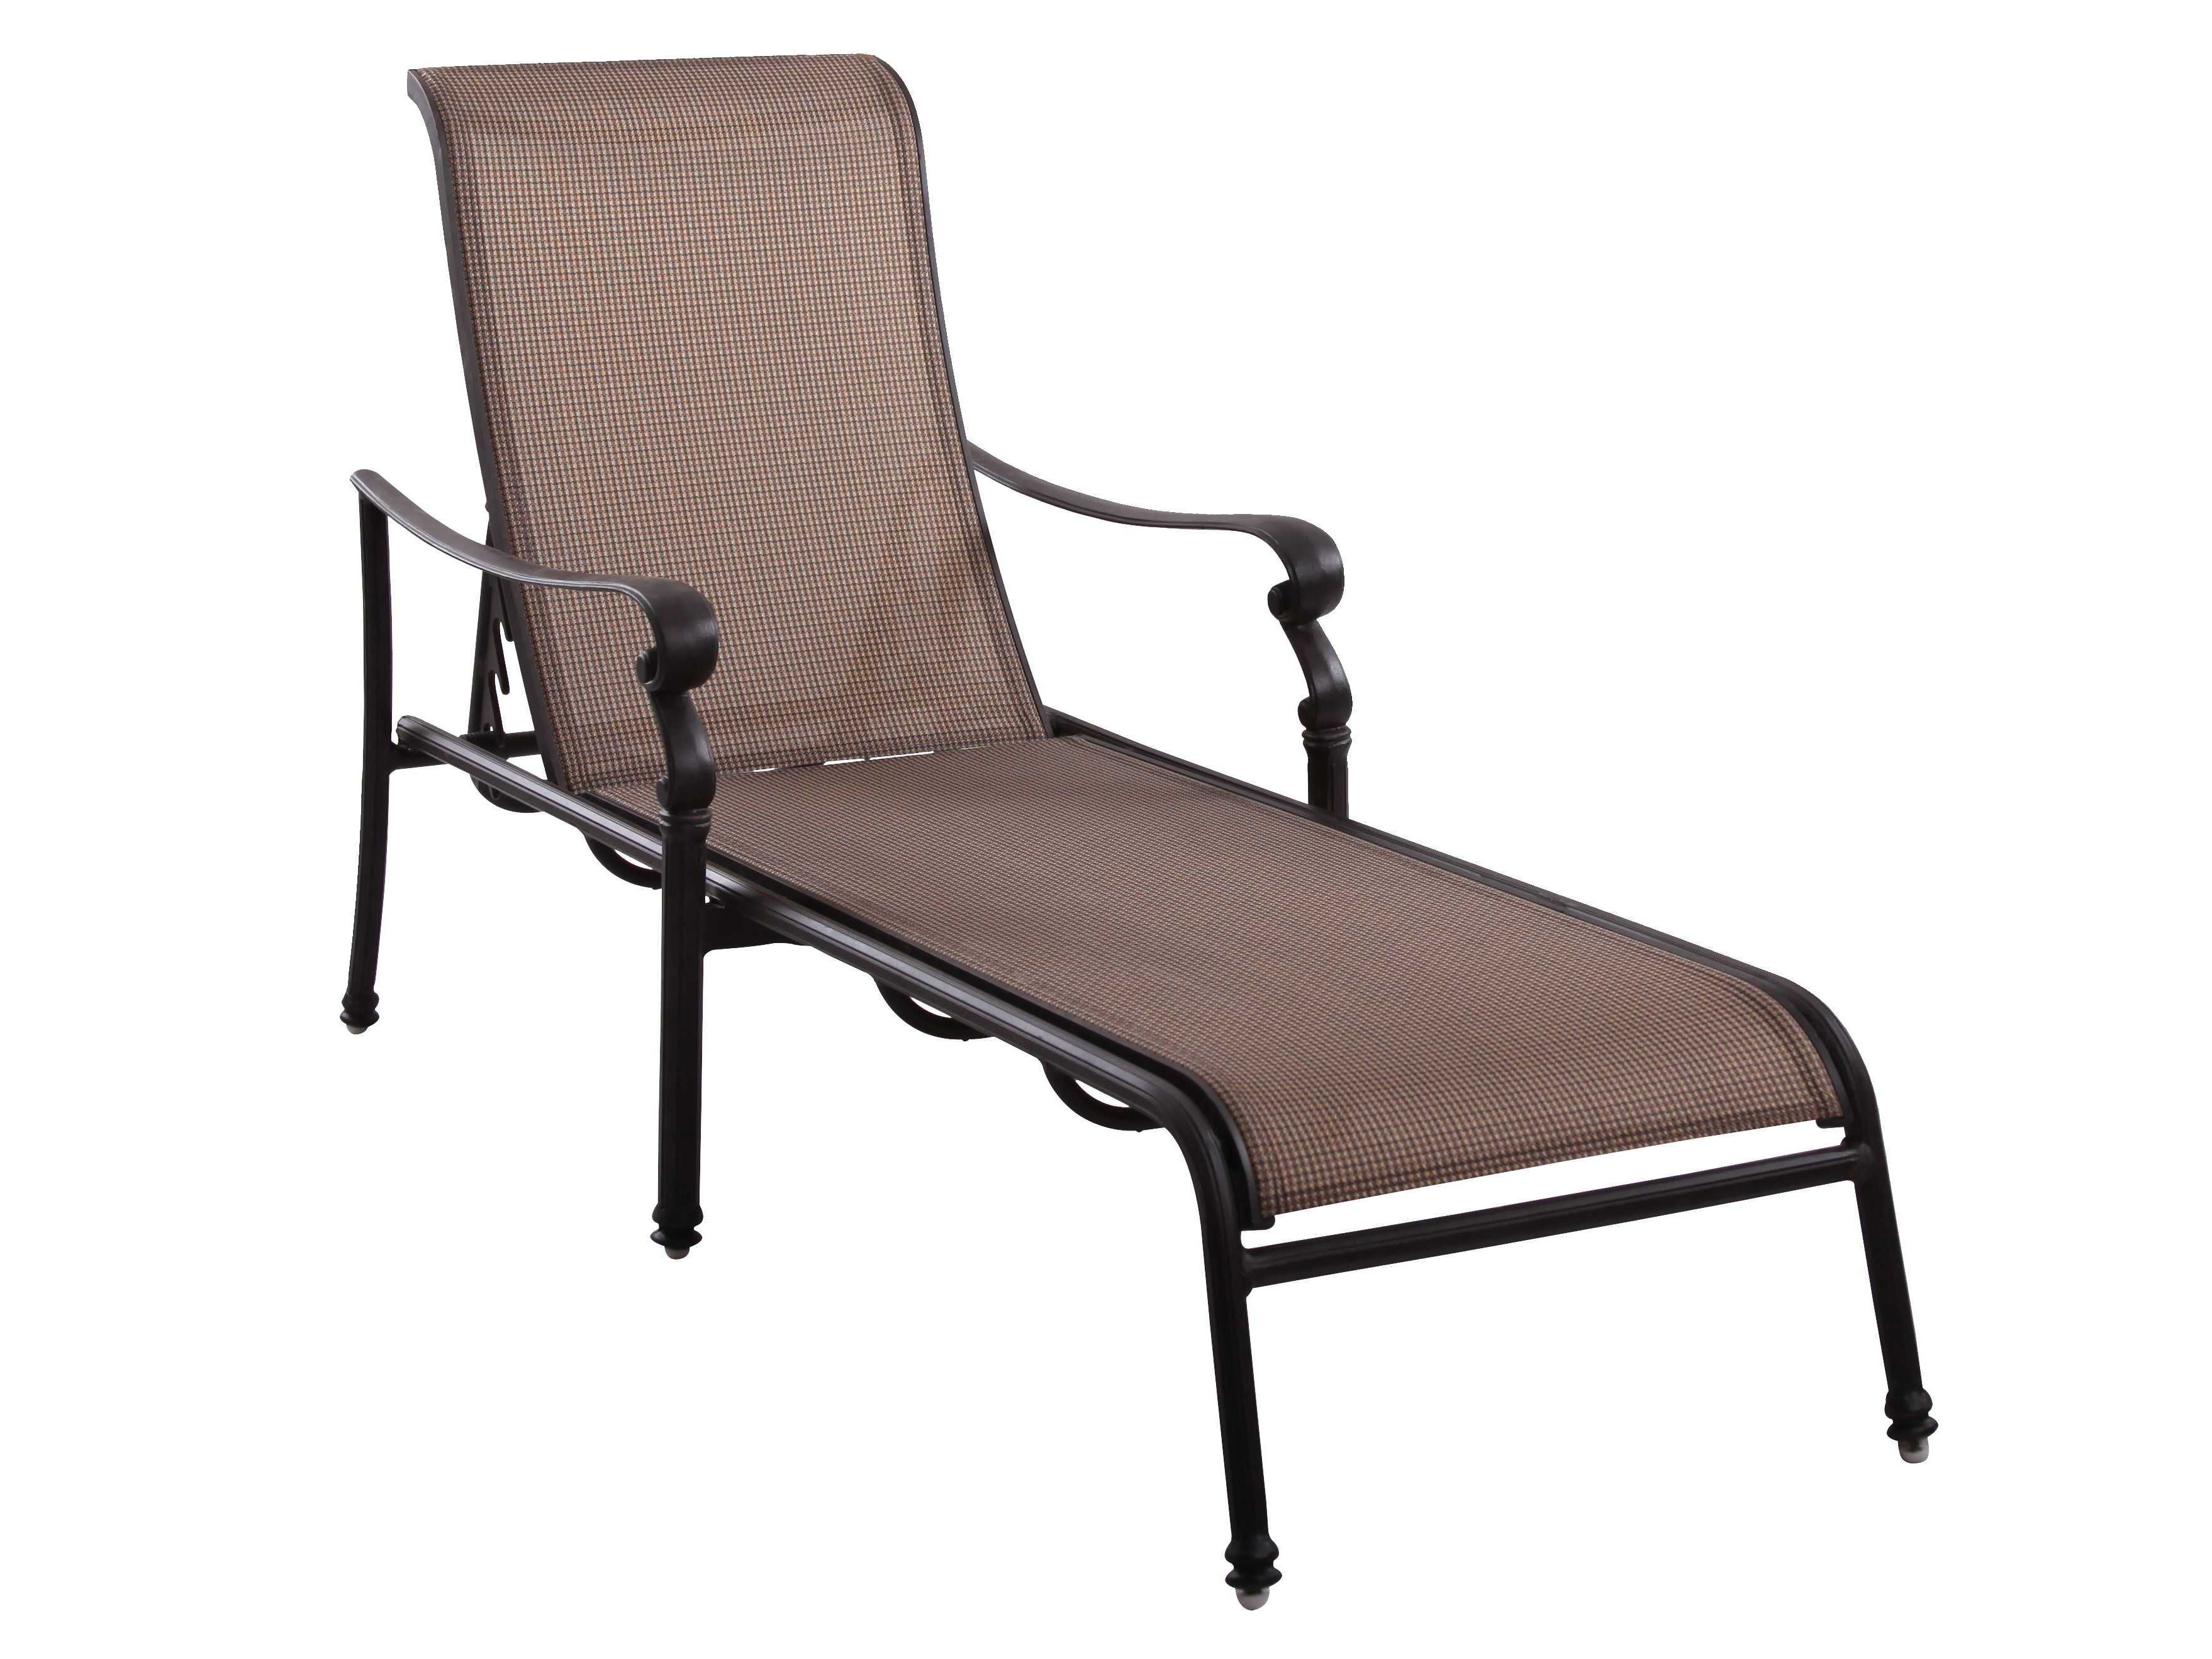 Darlee Outdoor Living Standard Monterey Cast Aluminum Antique Bronze Chaise  Lounge With 2019 Outdoor Aluminum Chaise Lounges (View 23 of 25)